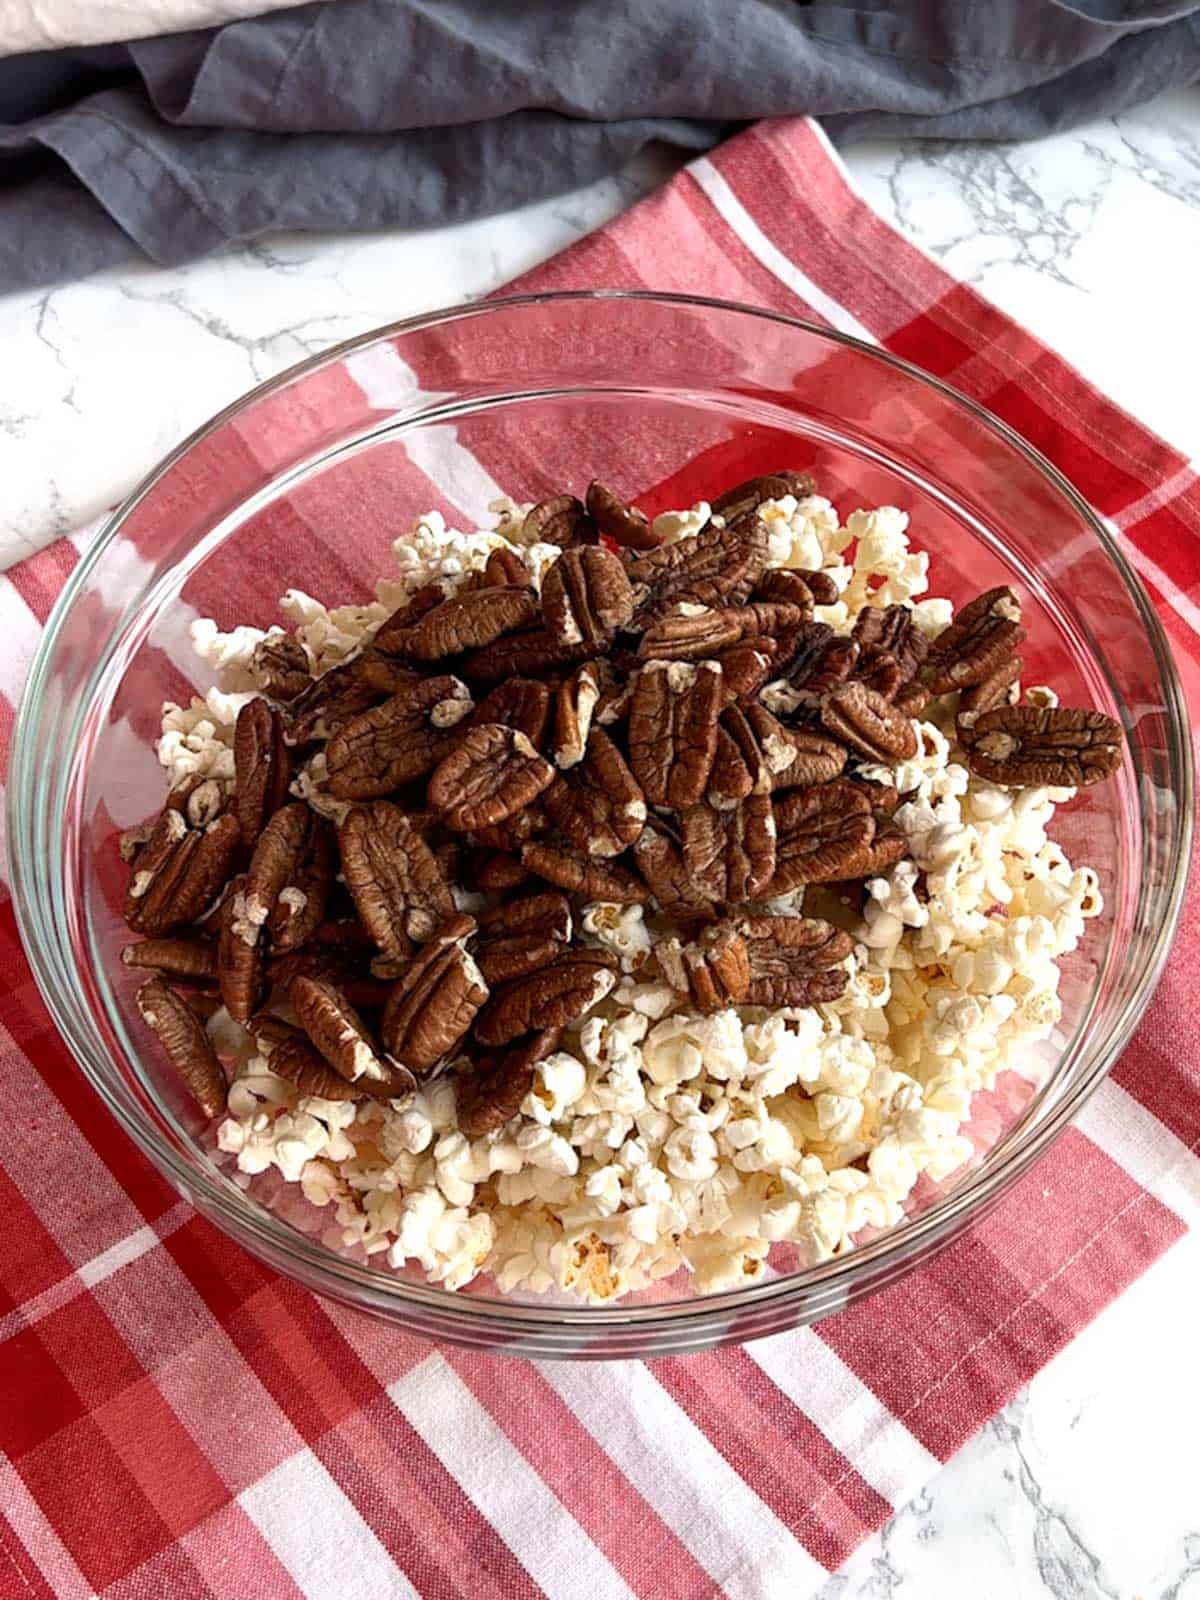 Popcorn and pecans in a large bowl.